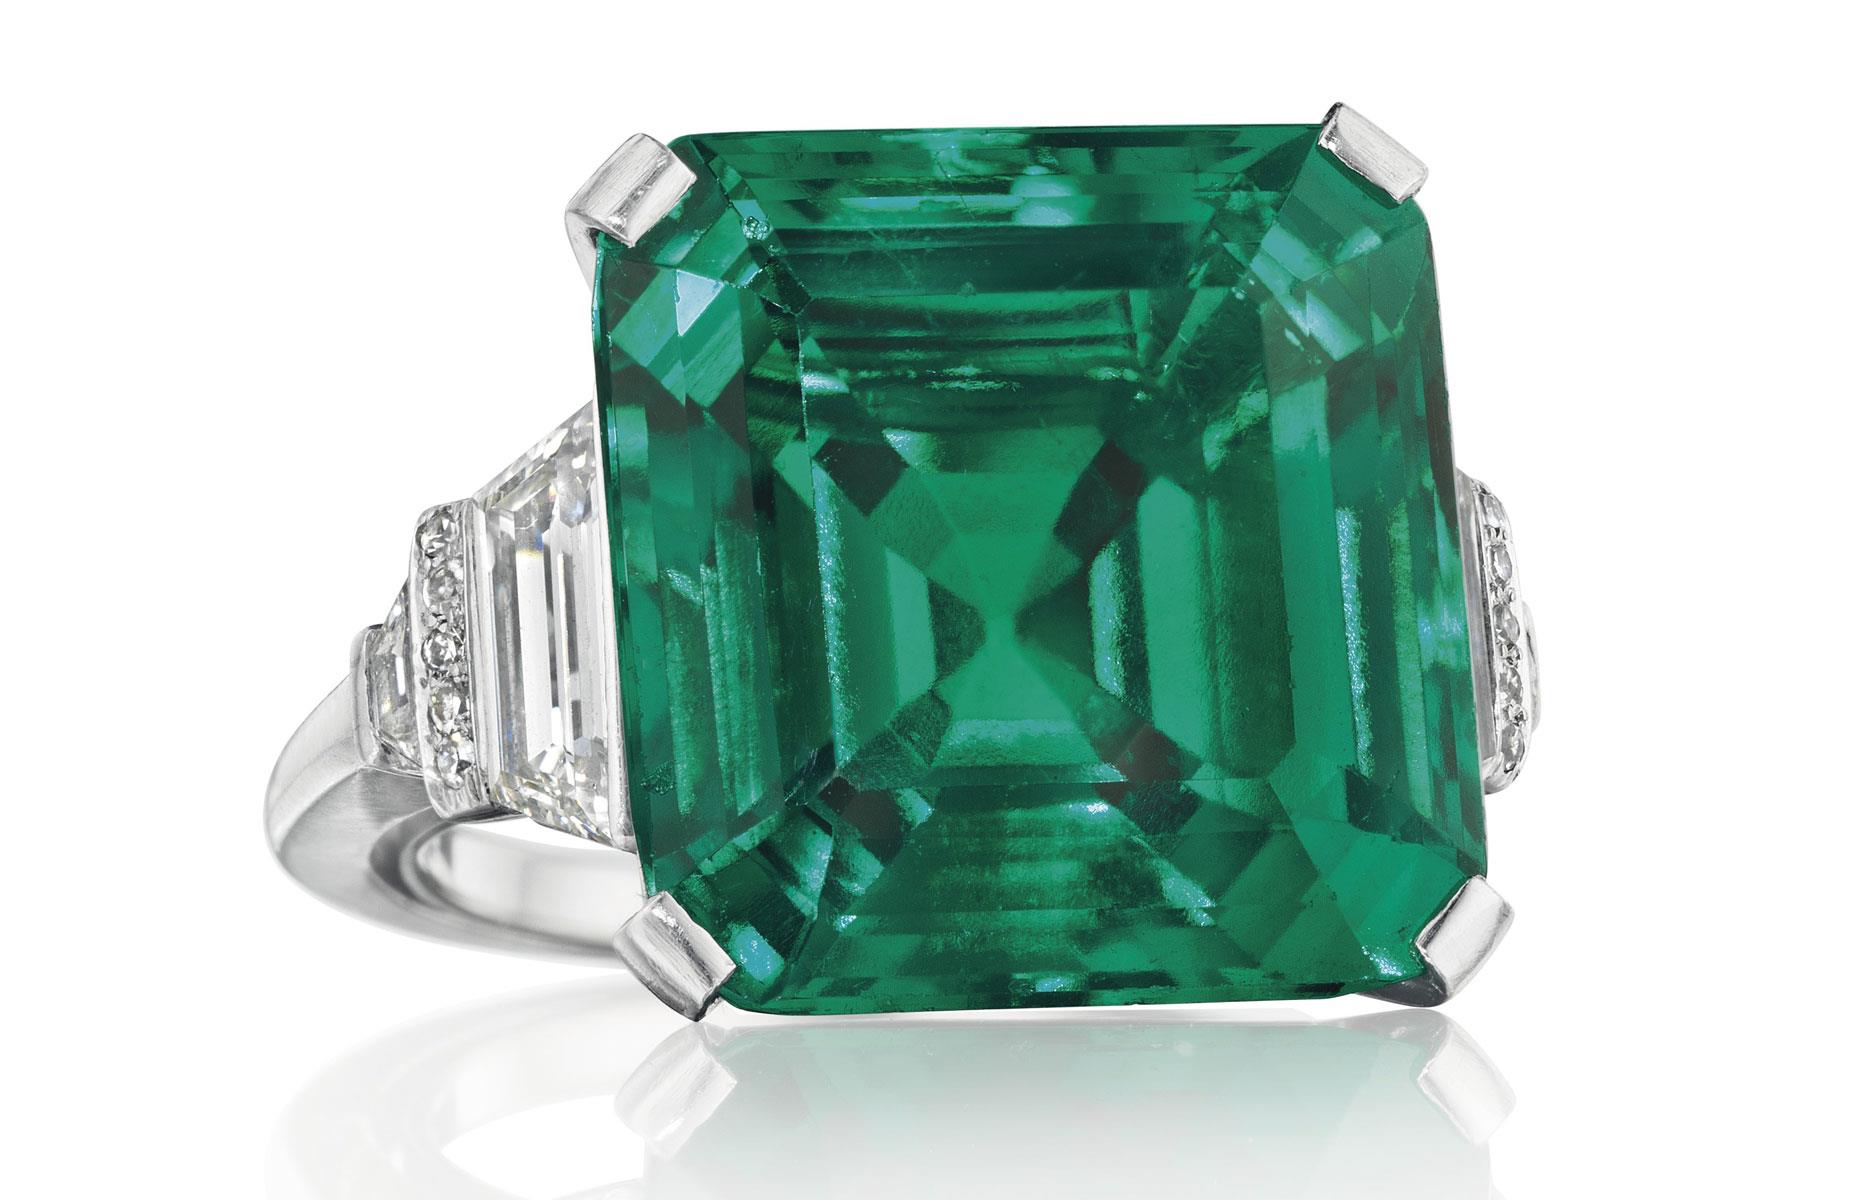 June: the Rockefeller Emerald sells for a record $5.5 million (£4.2m)